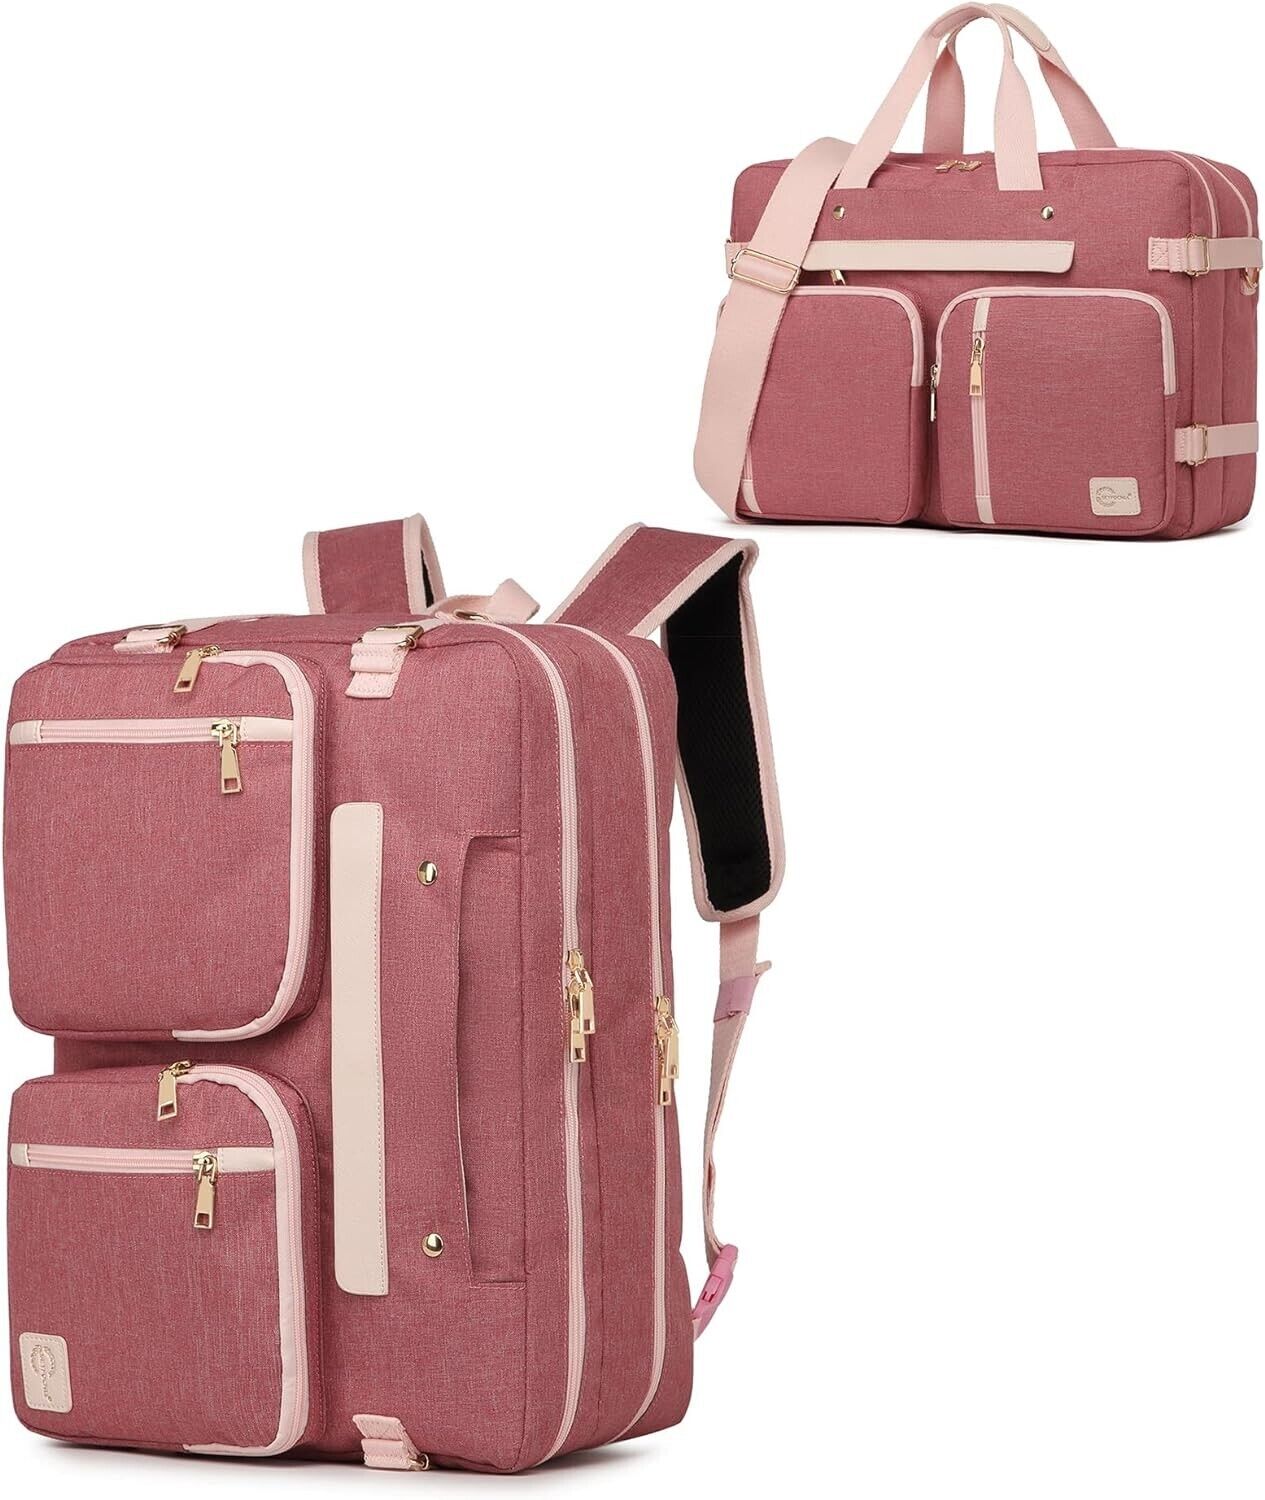 seyfocnia Convertible 3 in 1 Laptop Backpack,Messenger Backpack A-pink-17.3 